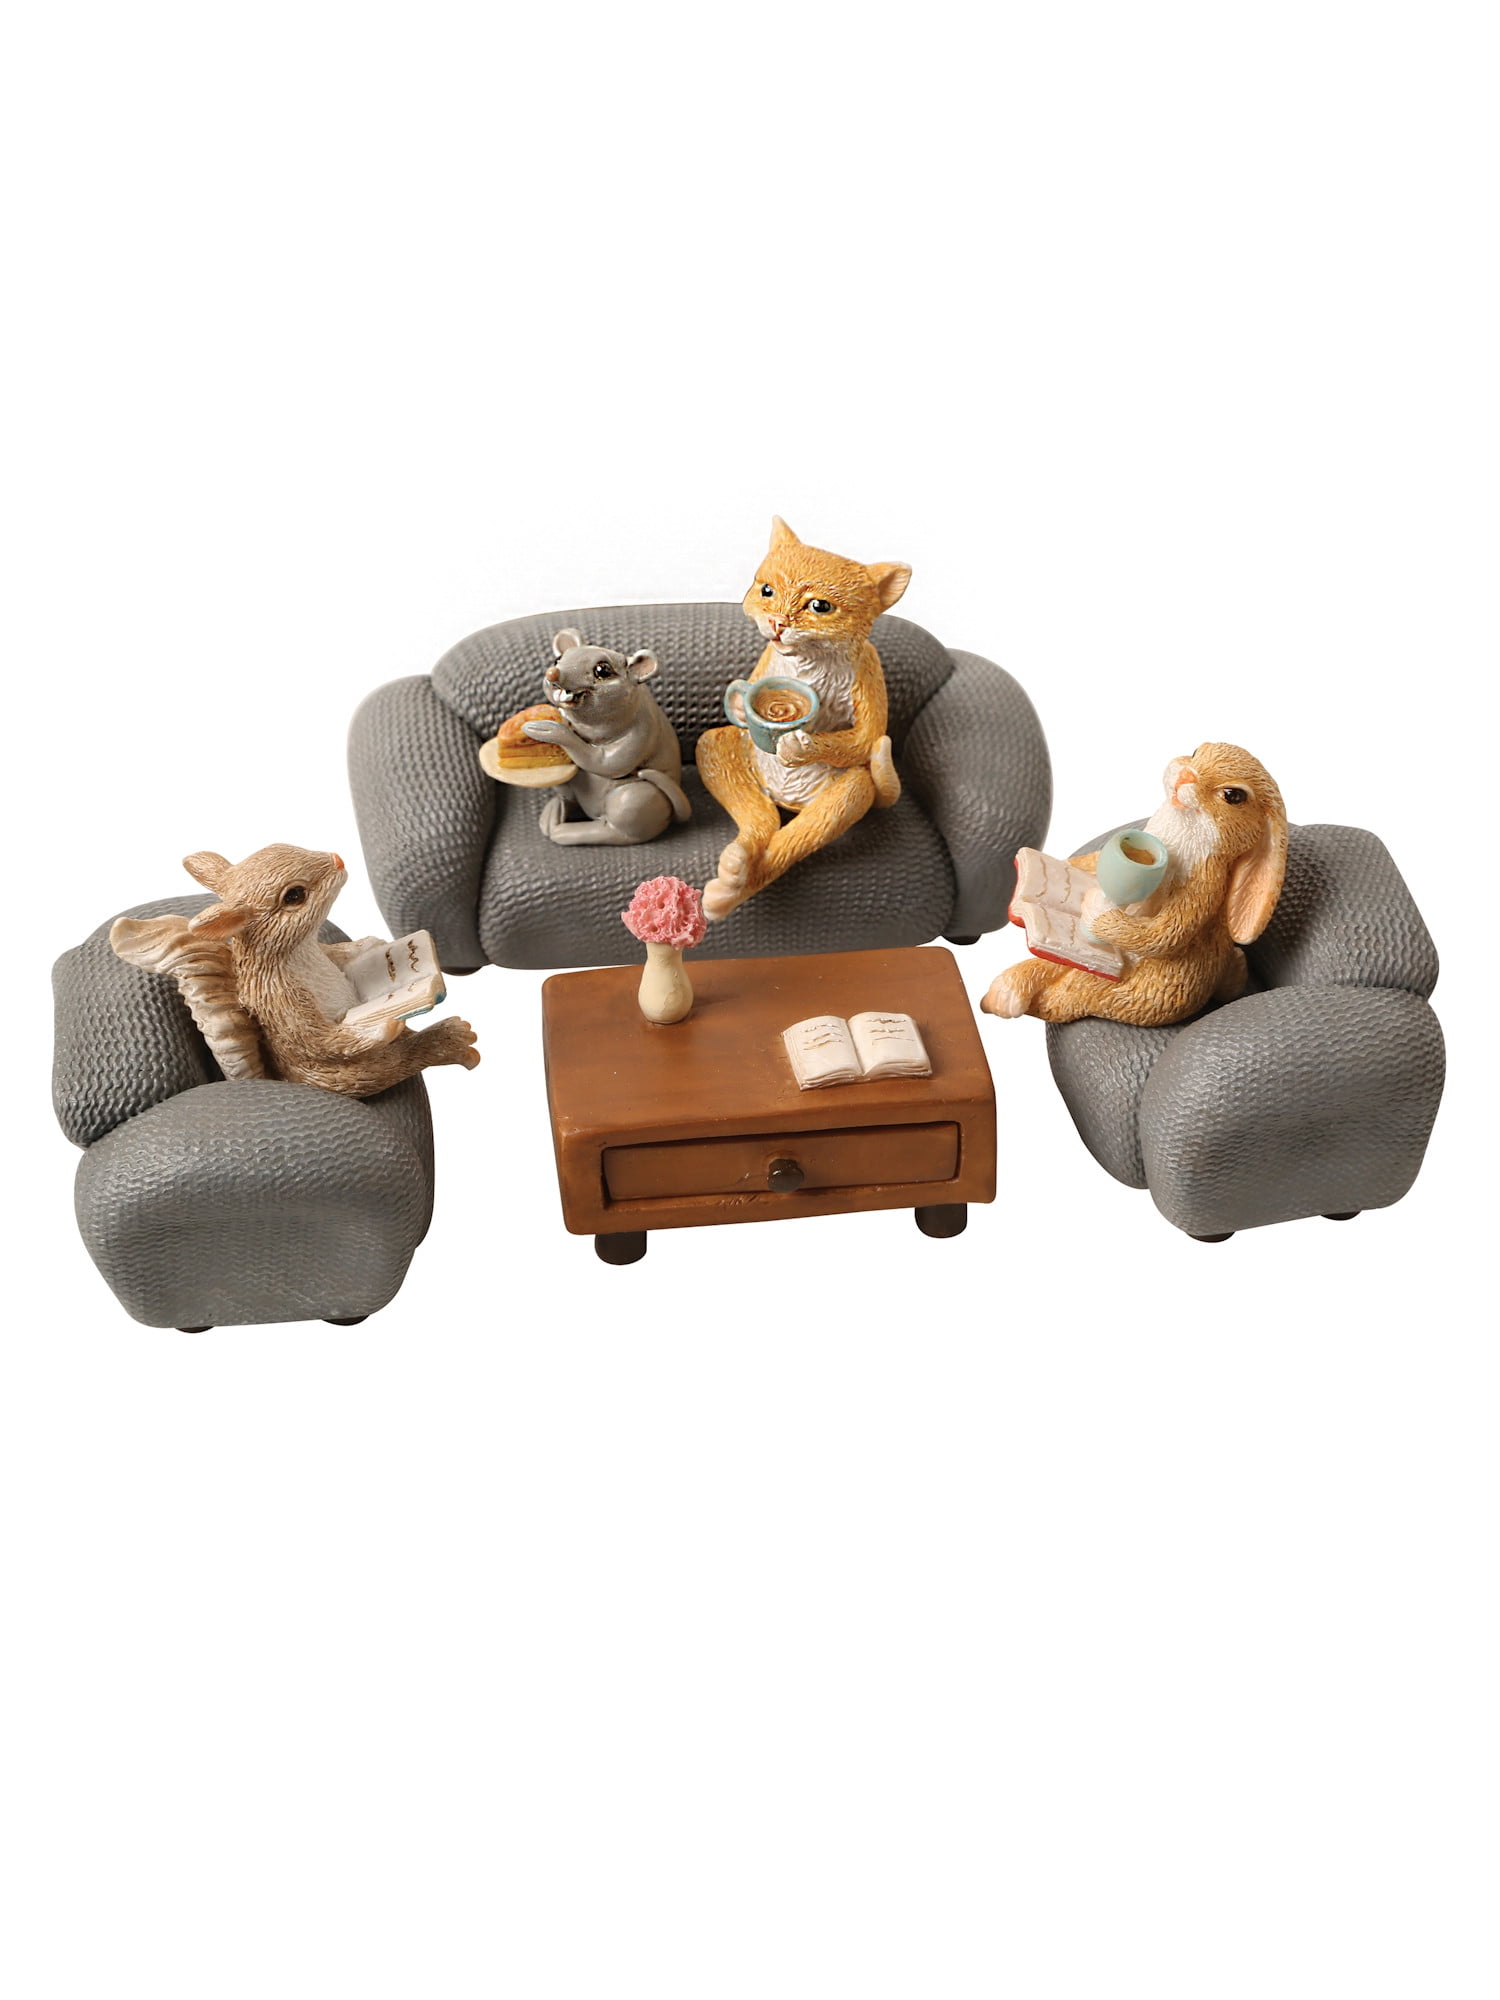 Art Artifact Rabbit And Friends Set 8 Piece Animal Book Club Figurines Include Bunny Cat Mouse Squirrel Furniture And Table Walmart Com Walmart Com